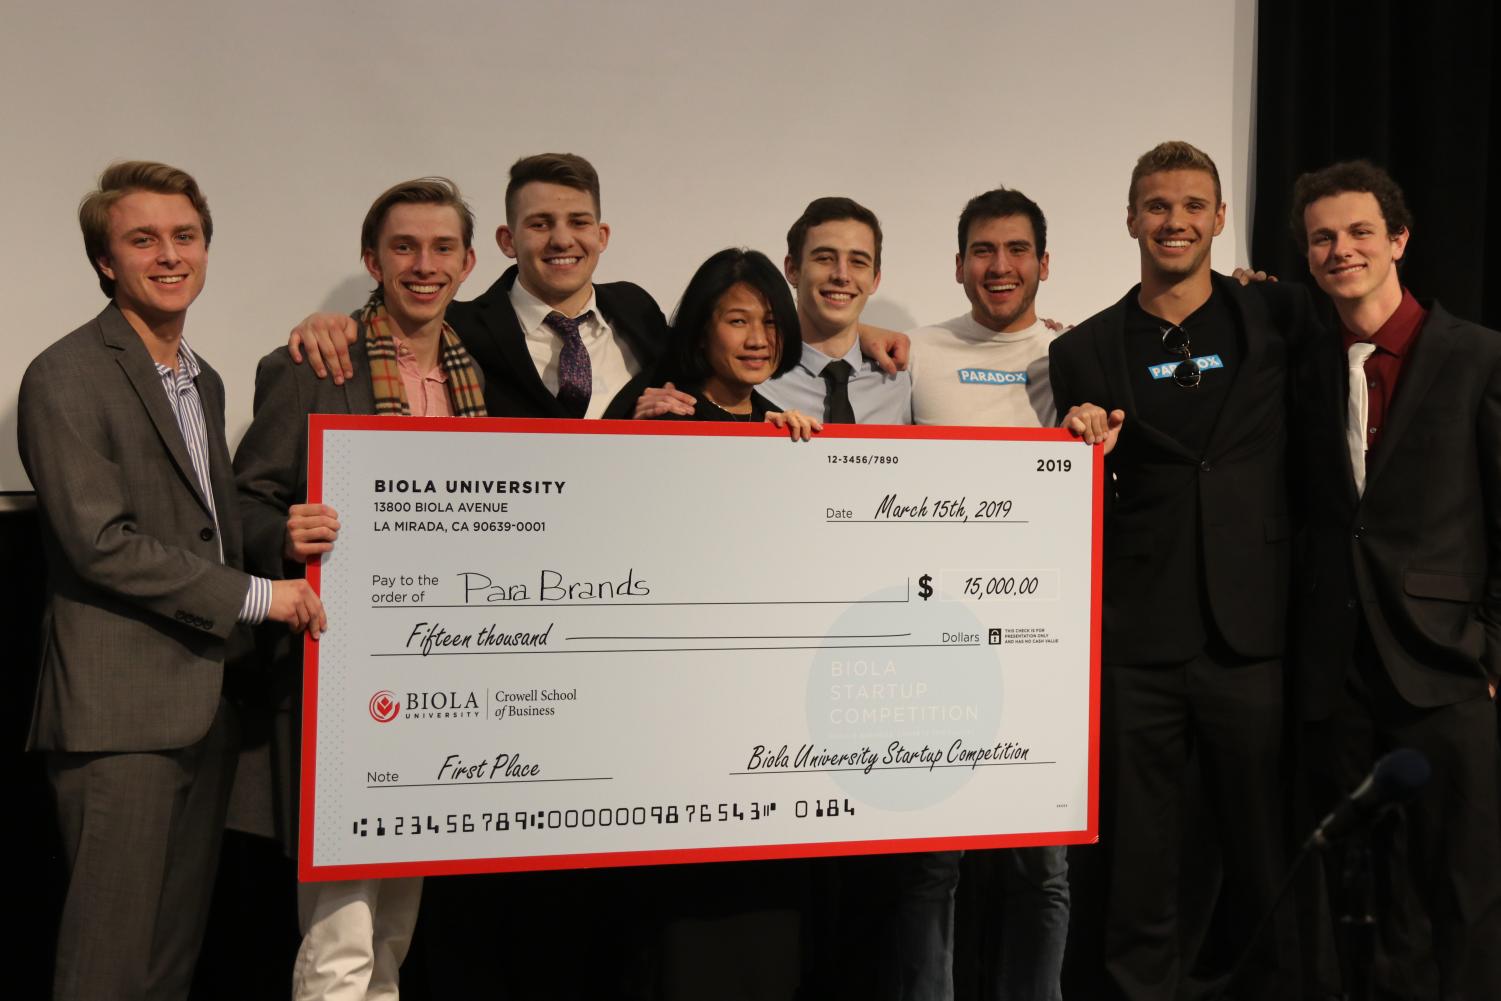 The parabrands team receives their first-place check